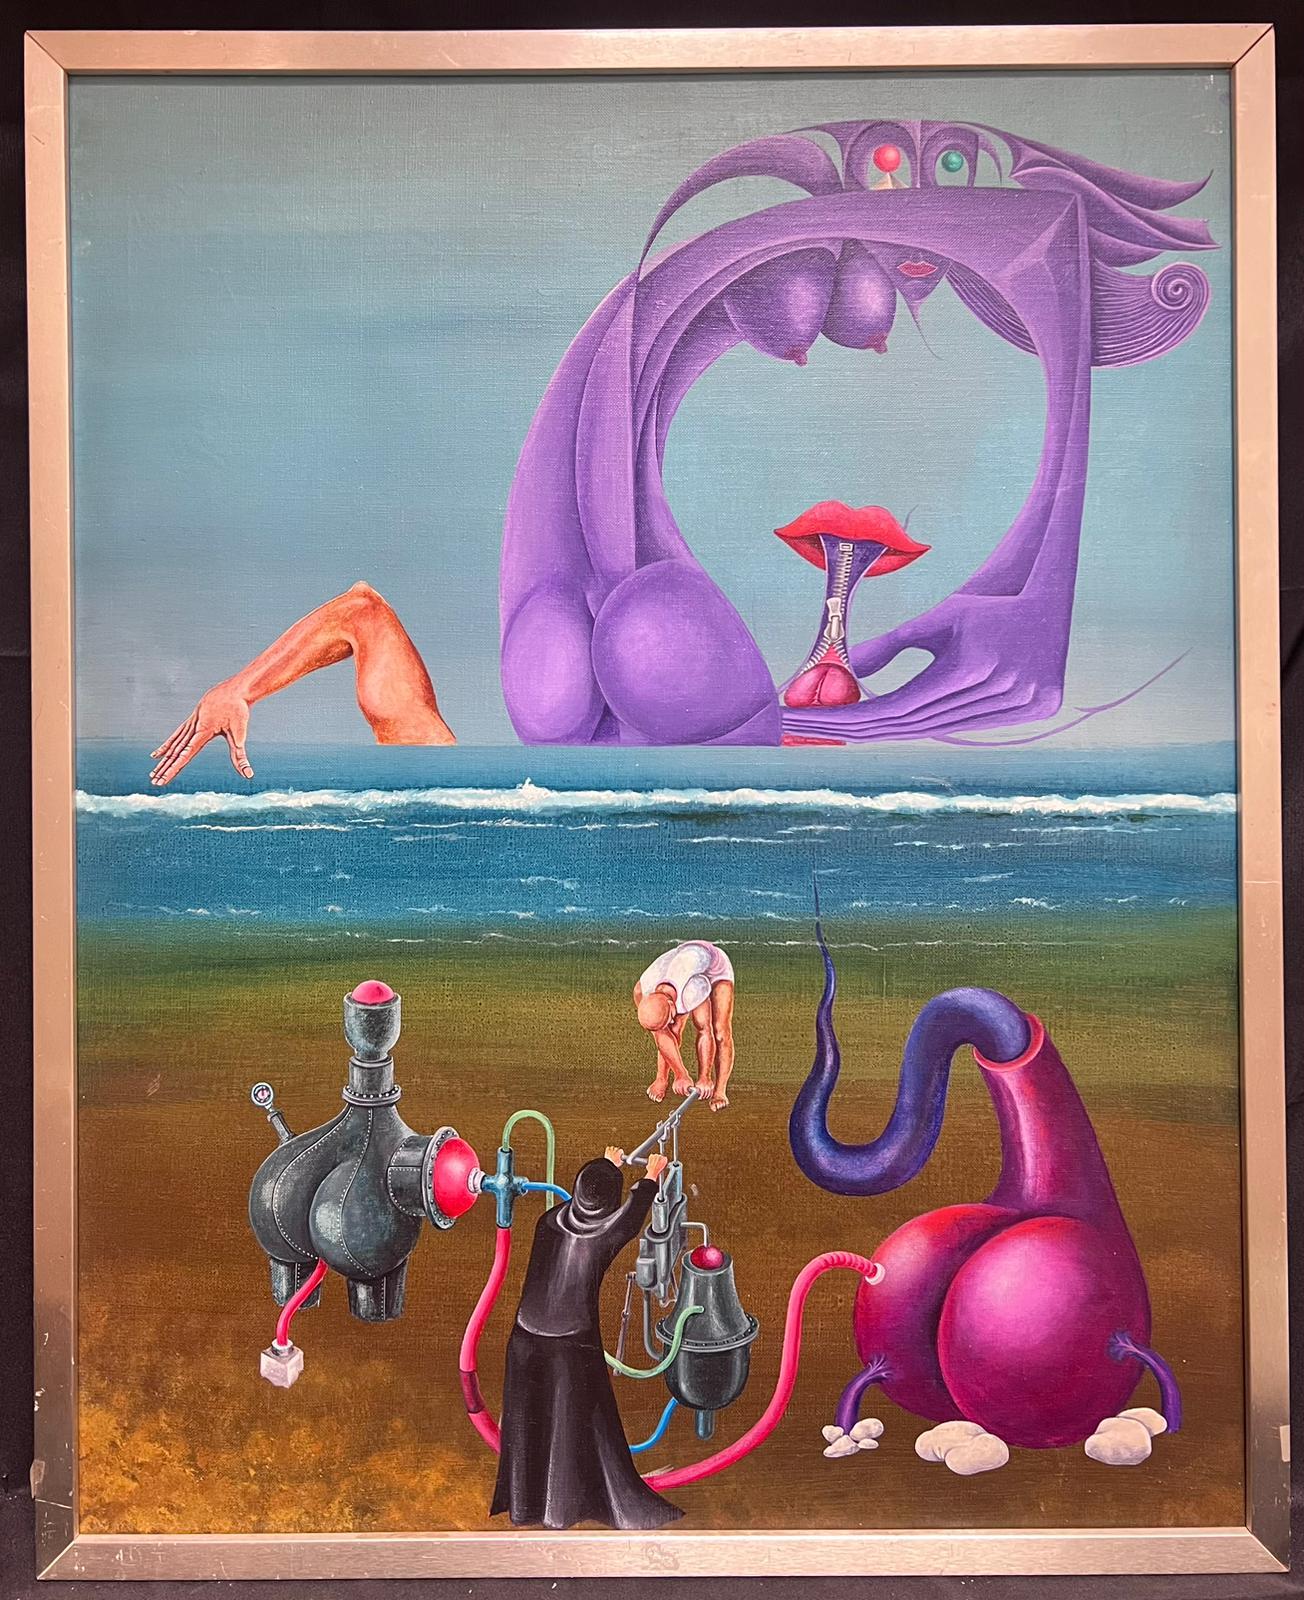 Surrealist composition
French School, dated 1975 verso
oil on canvas, framed
framed: 33.5 x 27 inches
canvas: 32 x 25.5 inches
inscribed verso
provenance: private collection, France
condition: very good and sound condition